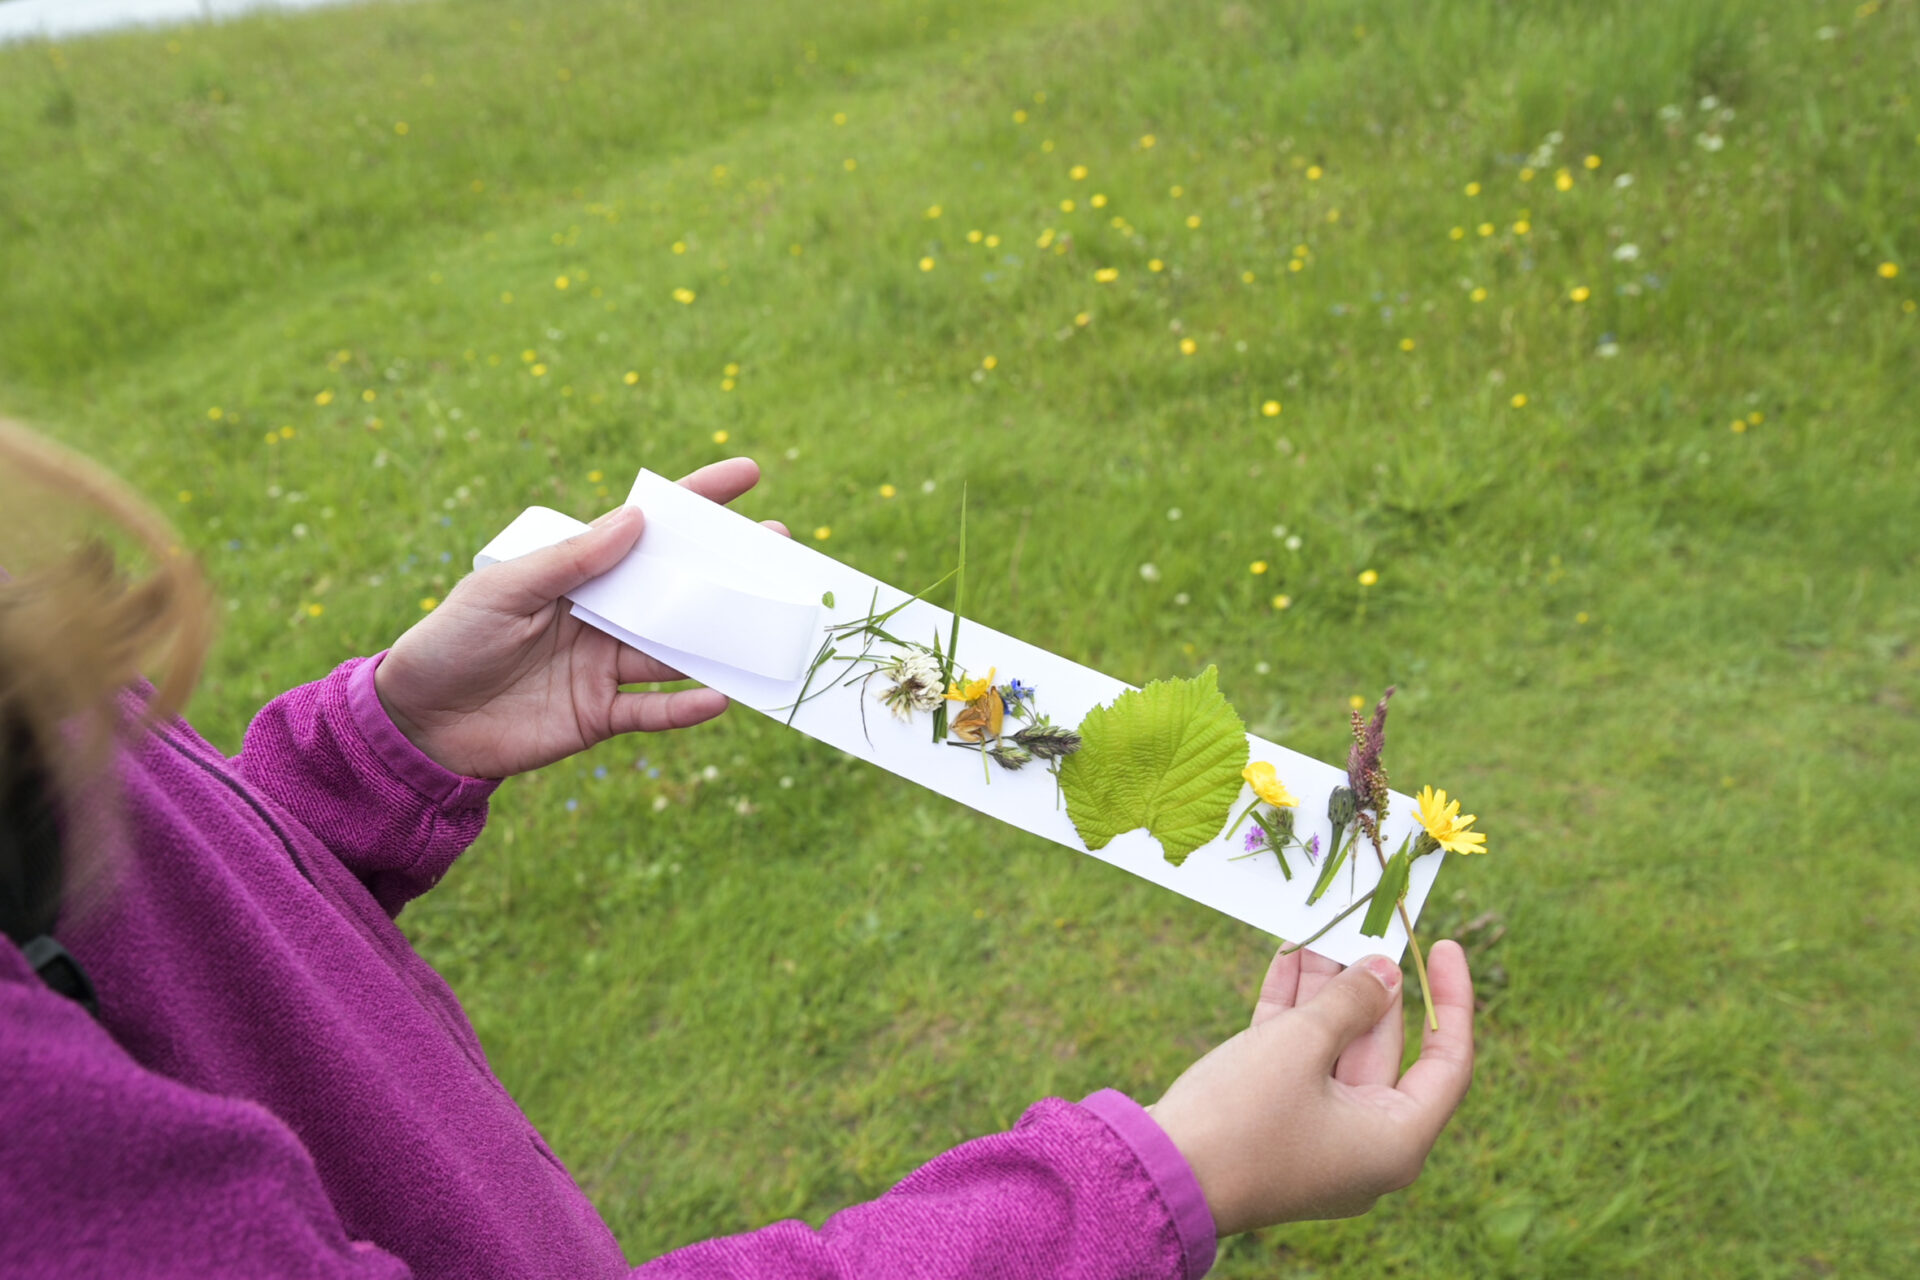 Photograph of childs hand holding a strip of paper with laves and flowers stuck to it